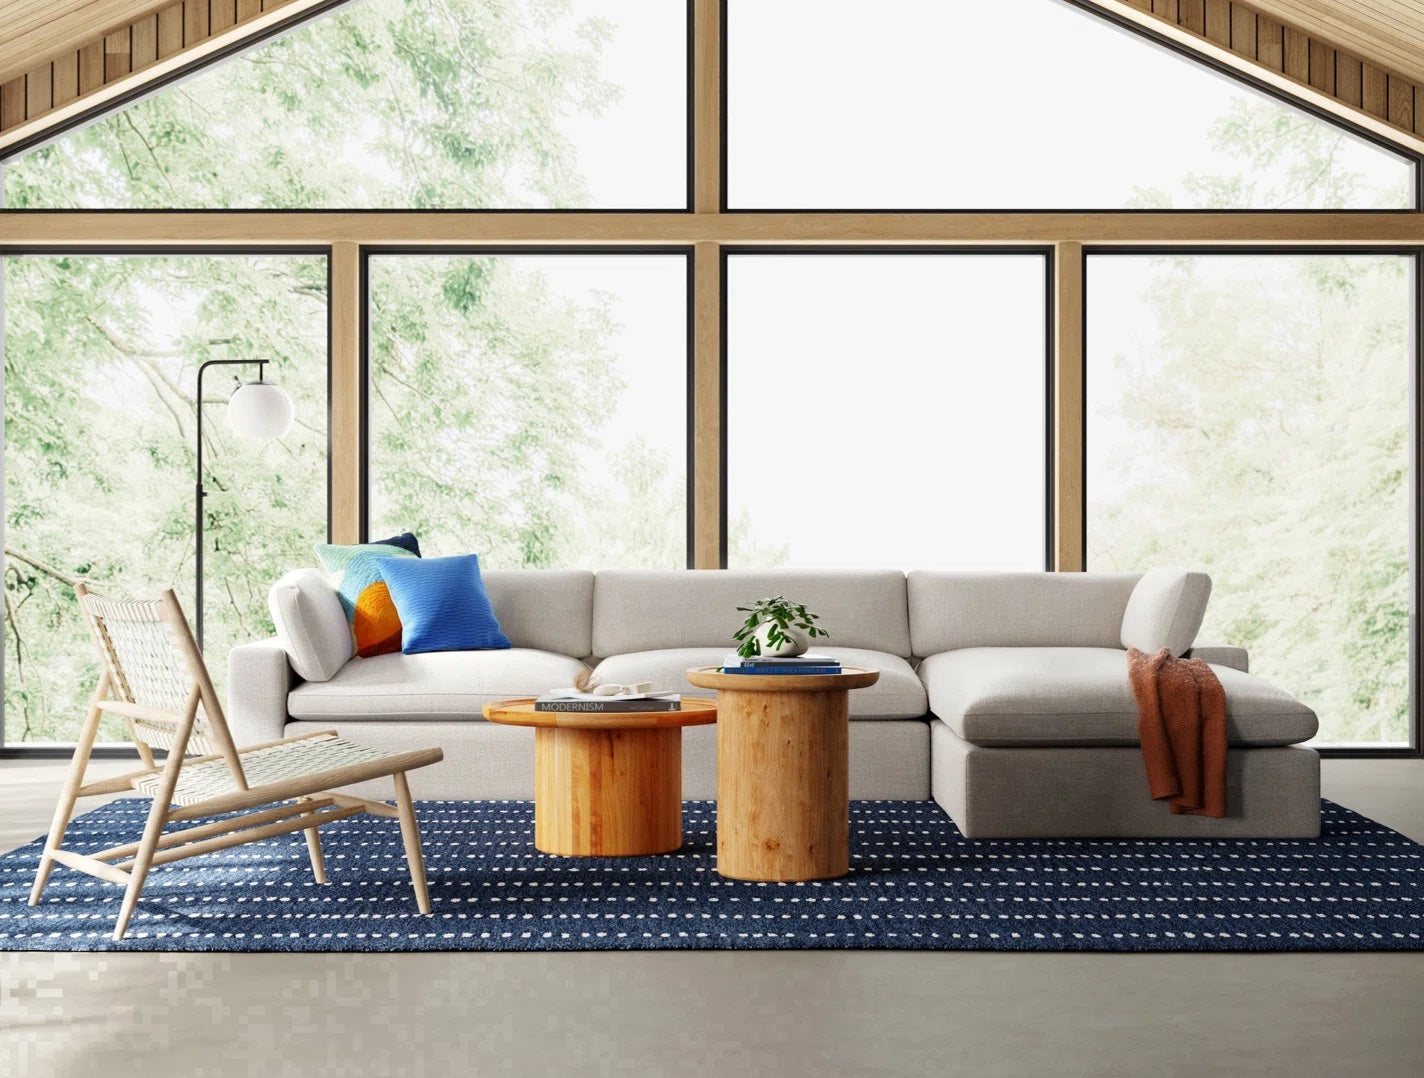 A modern living room with large windows revealing a lush, green forest outside. The room features a light grey sectional sofa adorned with colorful pillows, two wooden coffee tables, a woven chair, an orange throw blanket, a floor lamp, and a blue patterned rug.